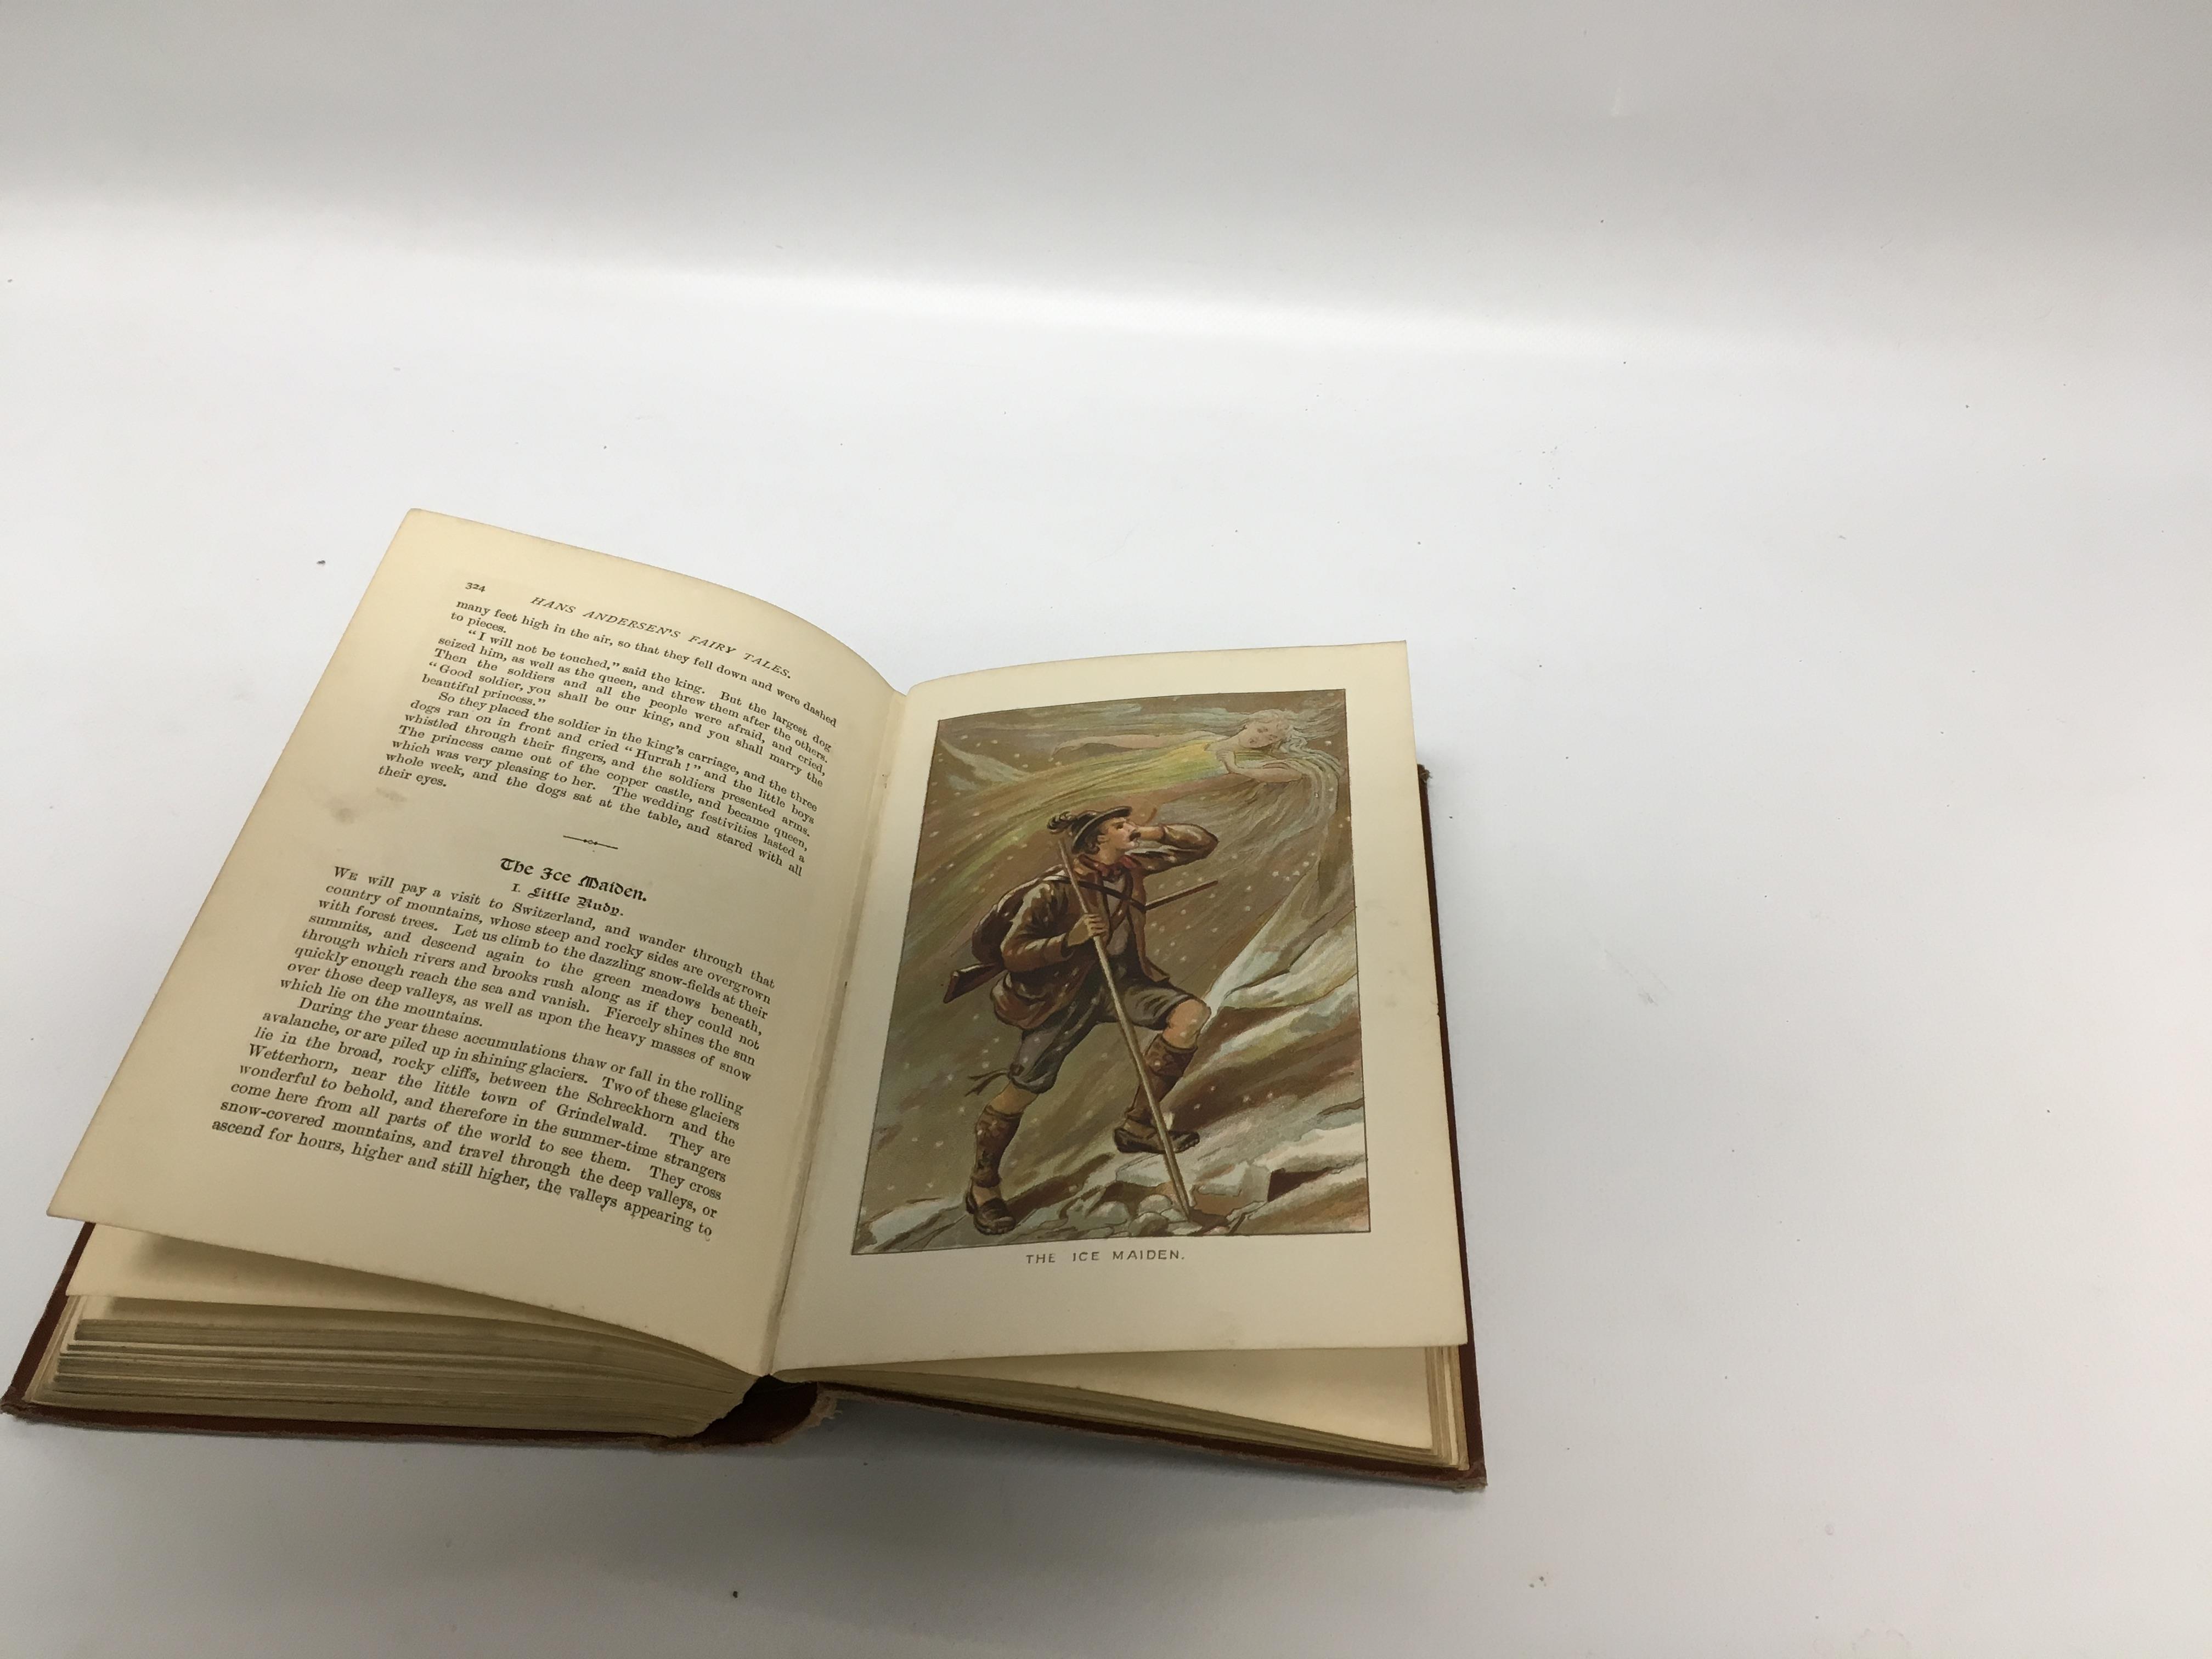 Collection of books of Fairy tales (most showing wear) including: Hans Andersen's Fairy Tales. - Image 10 of 10